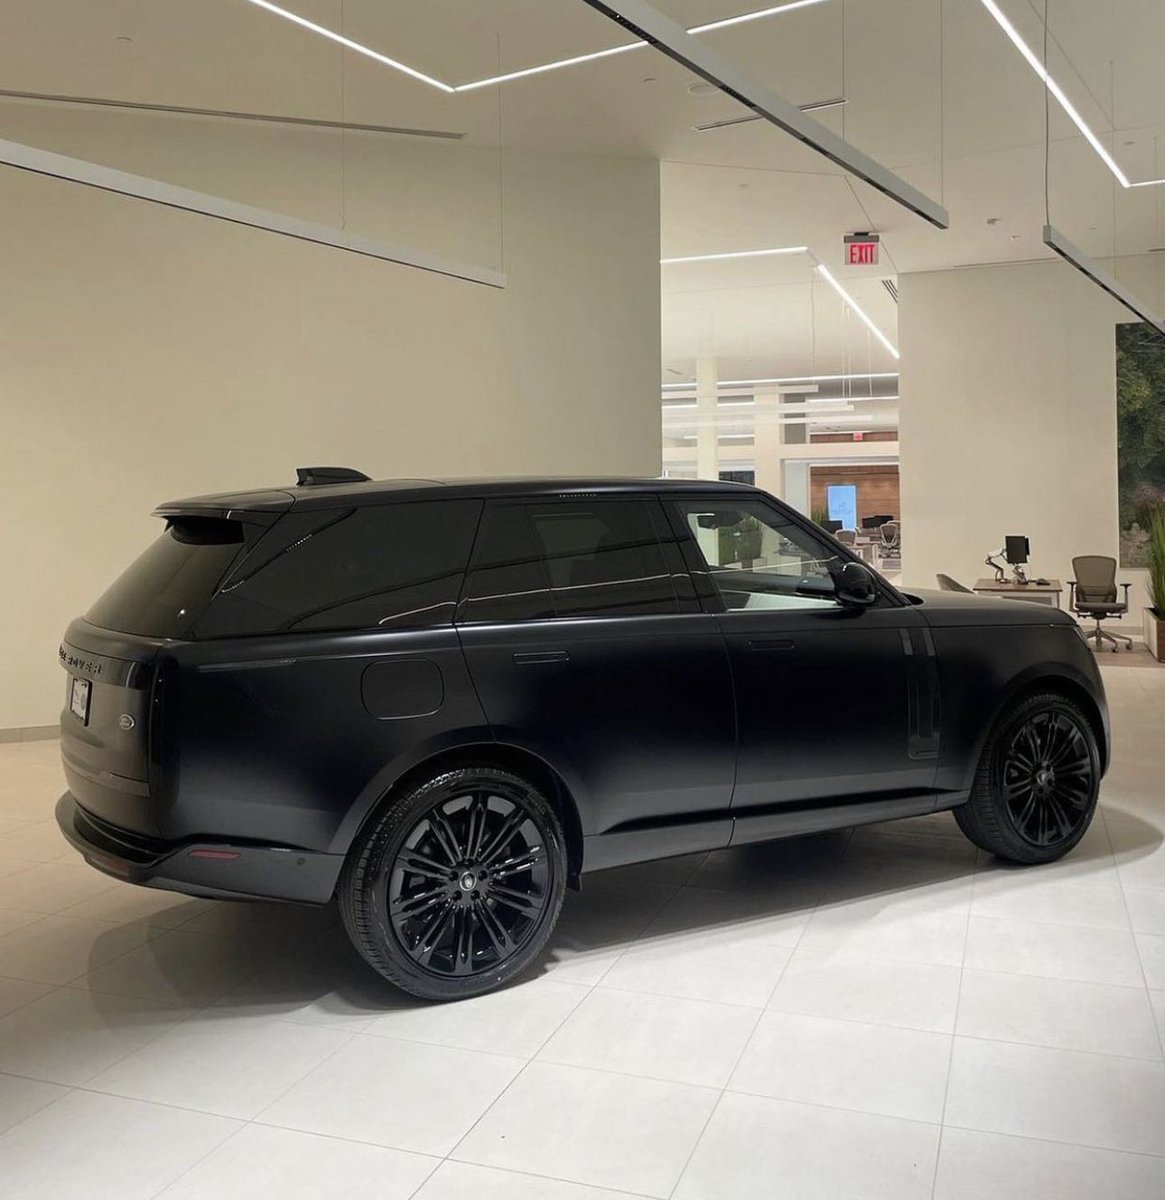 murdered out Rover.